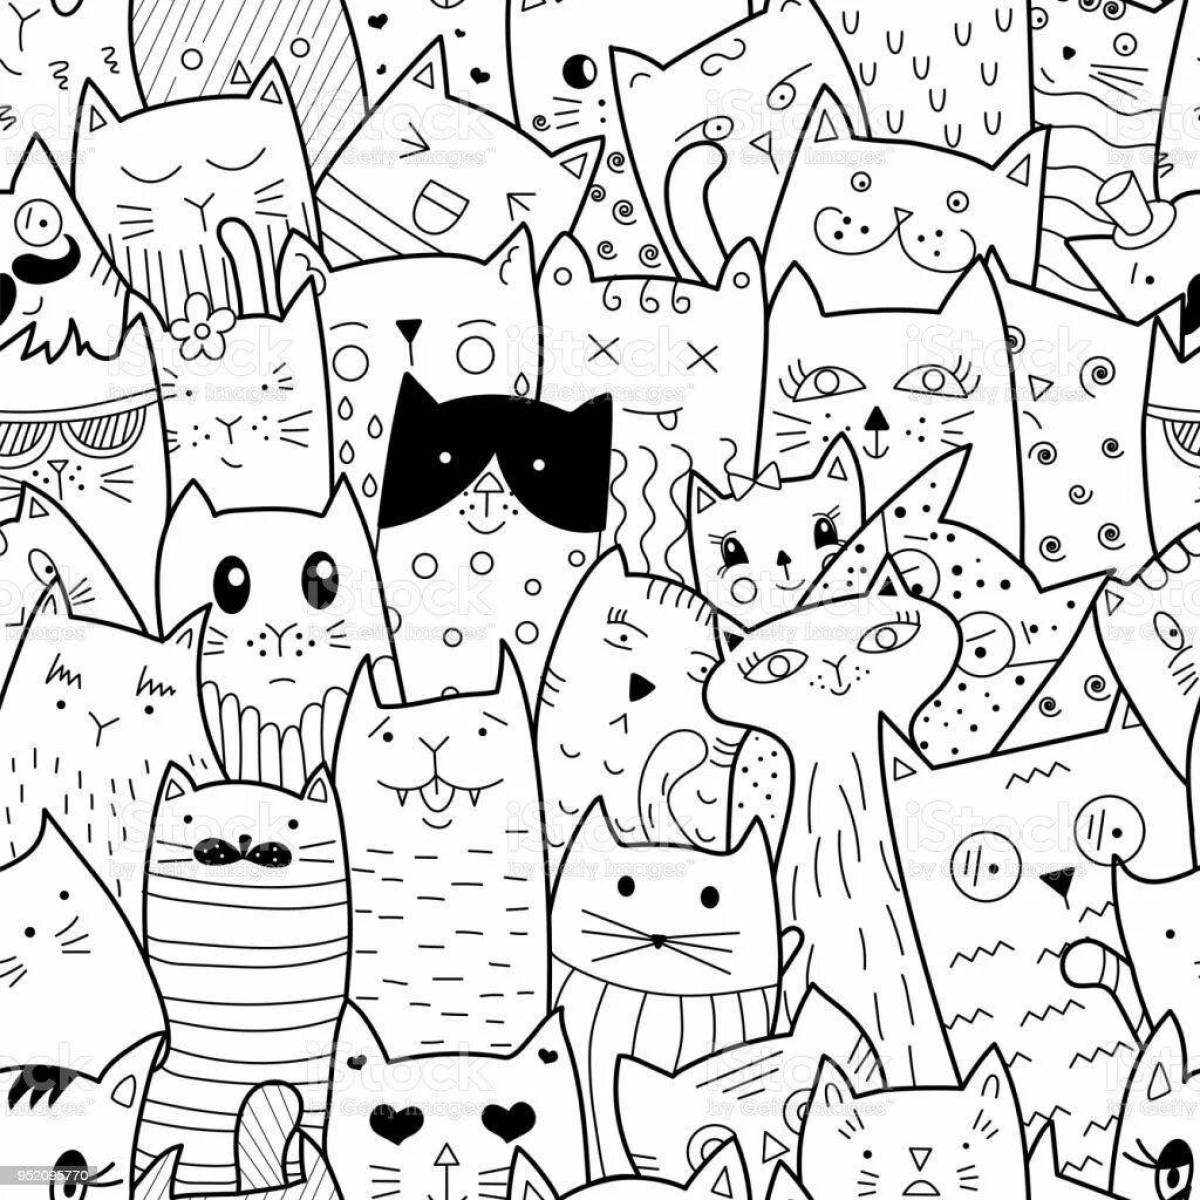 Outgoing many cats on one page